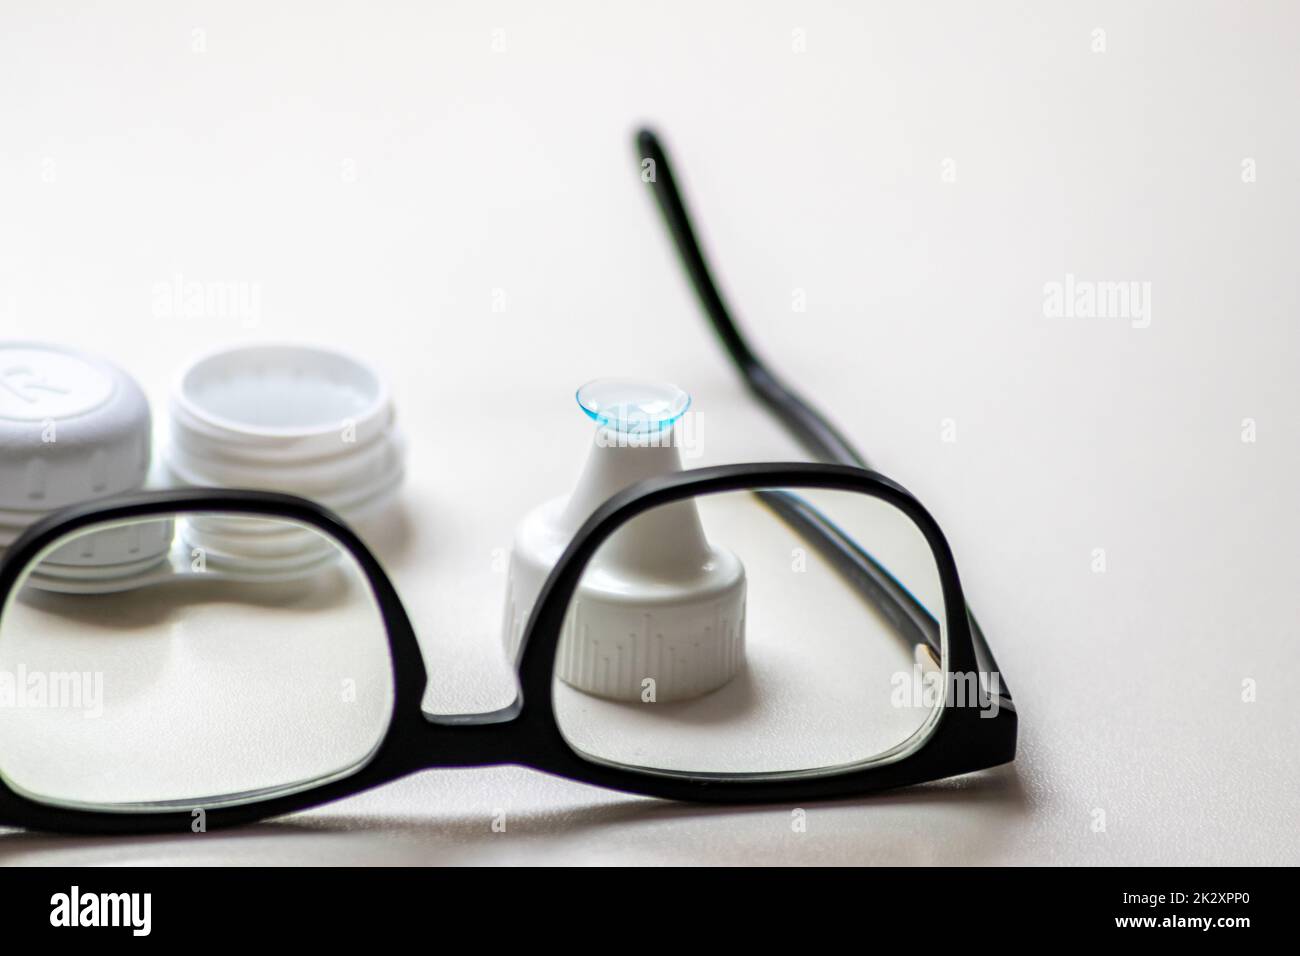 Blue contact lens through black eyeglasses shows different eyewear to correct farsightedness and nearsightedness by optometry or eye doctor against myopia with visual eye correction for perfect vision Stock Photo